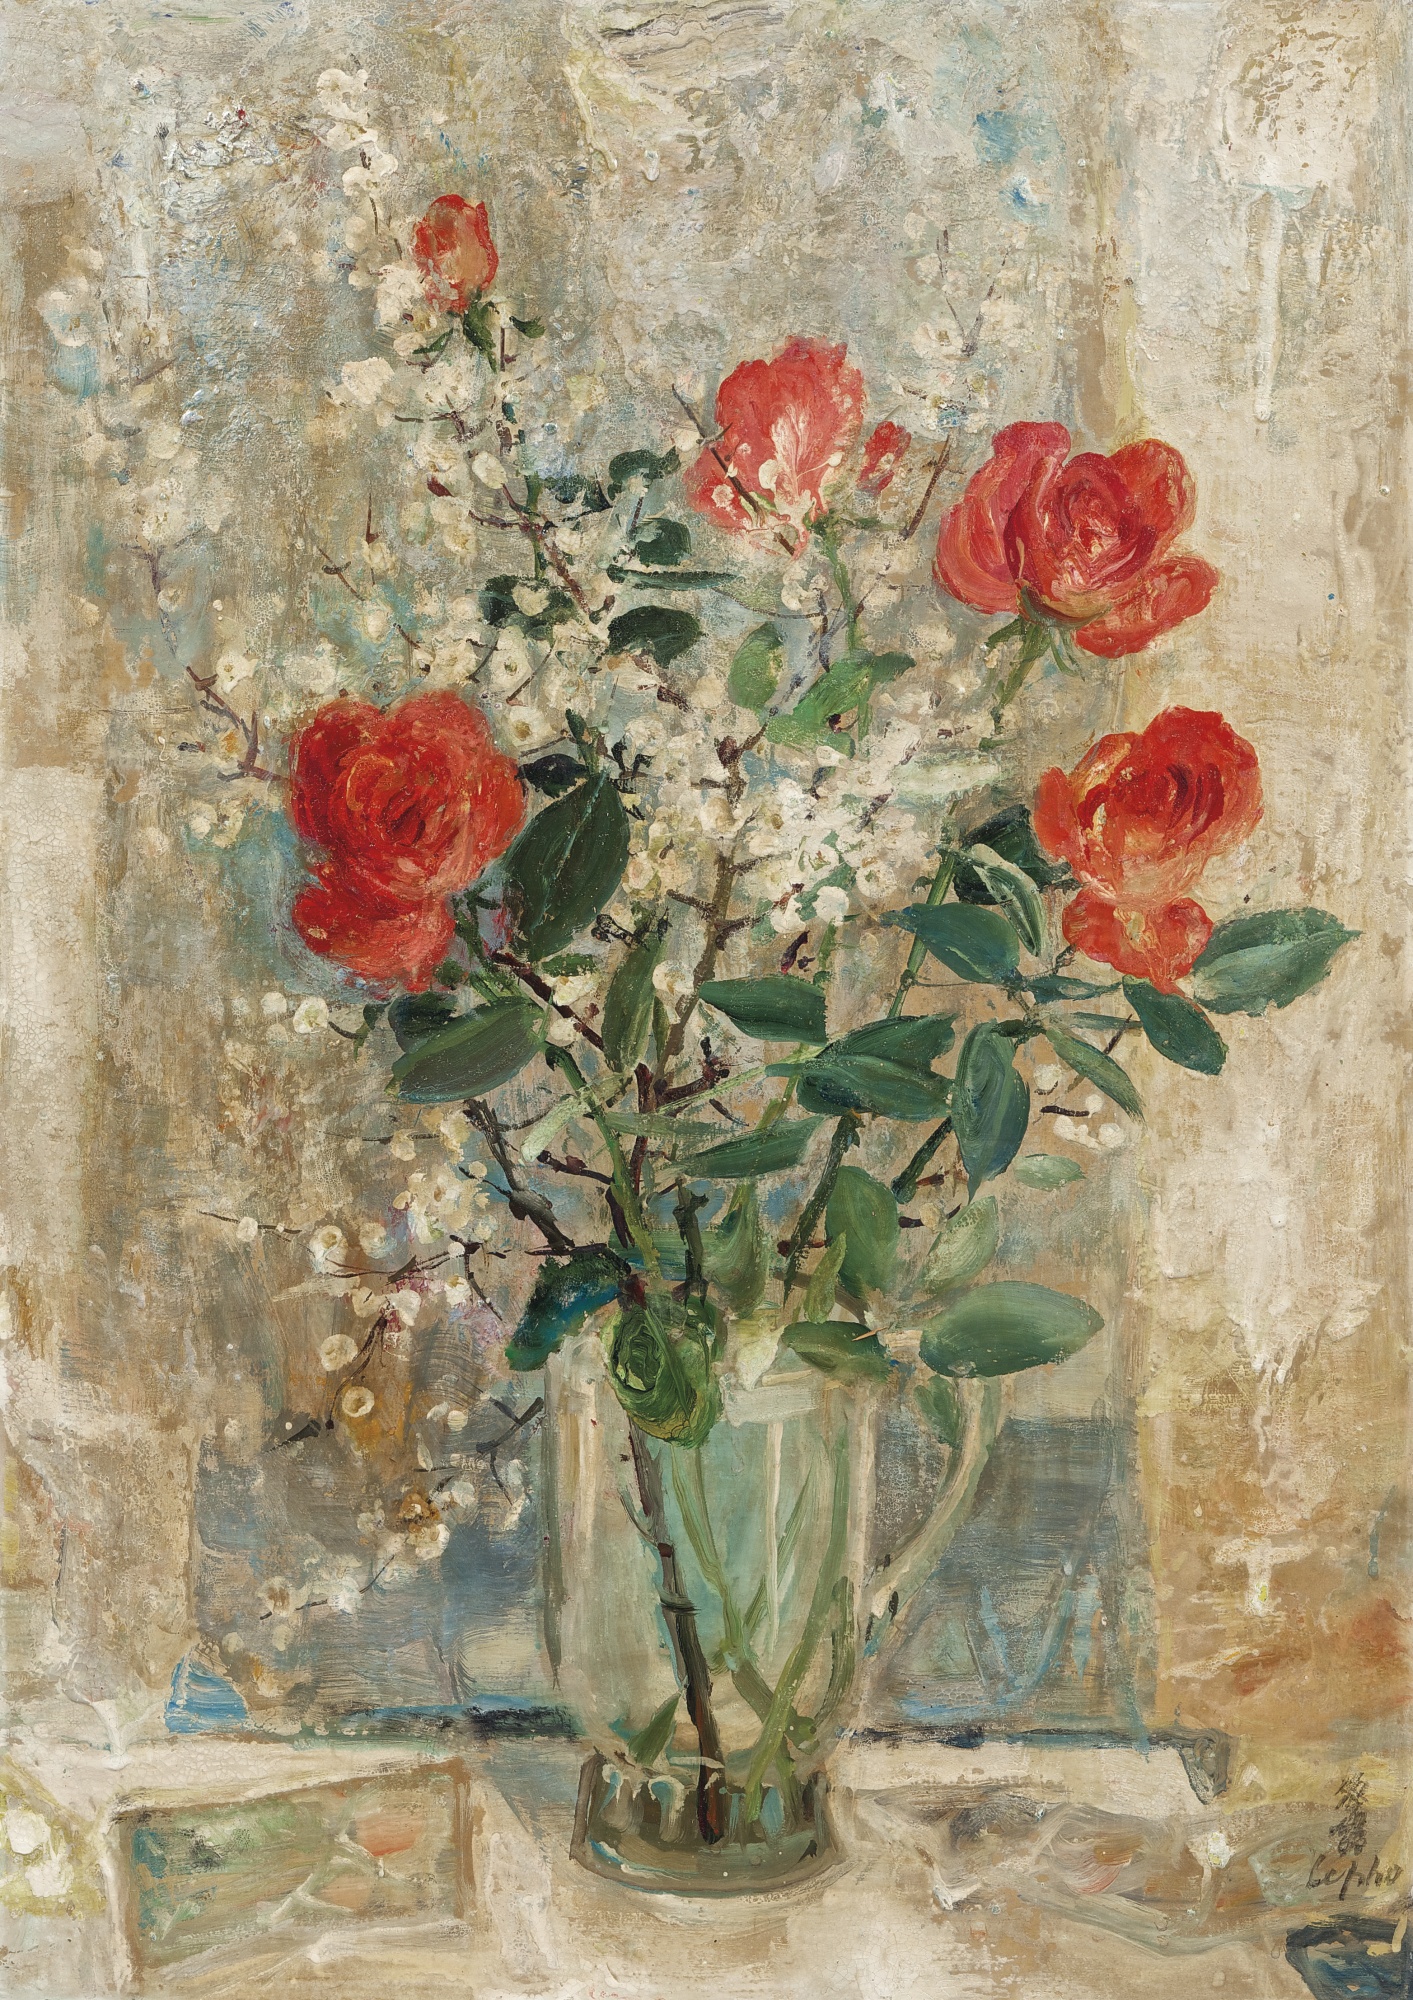 a painting showing red roses in a vase